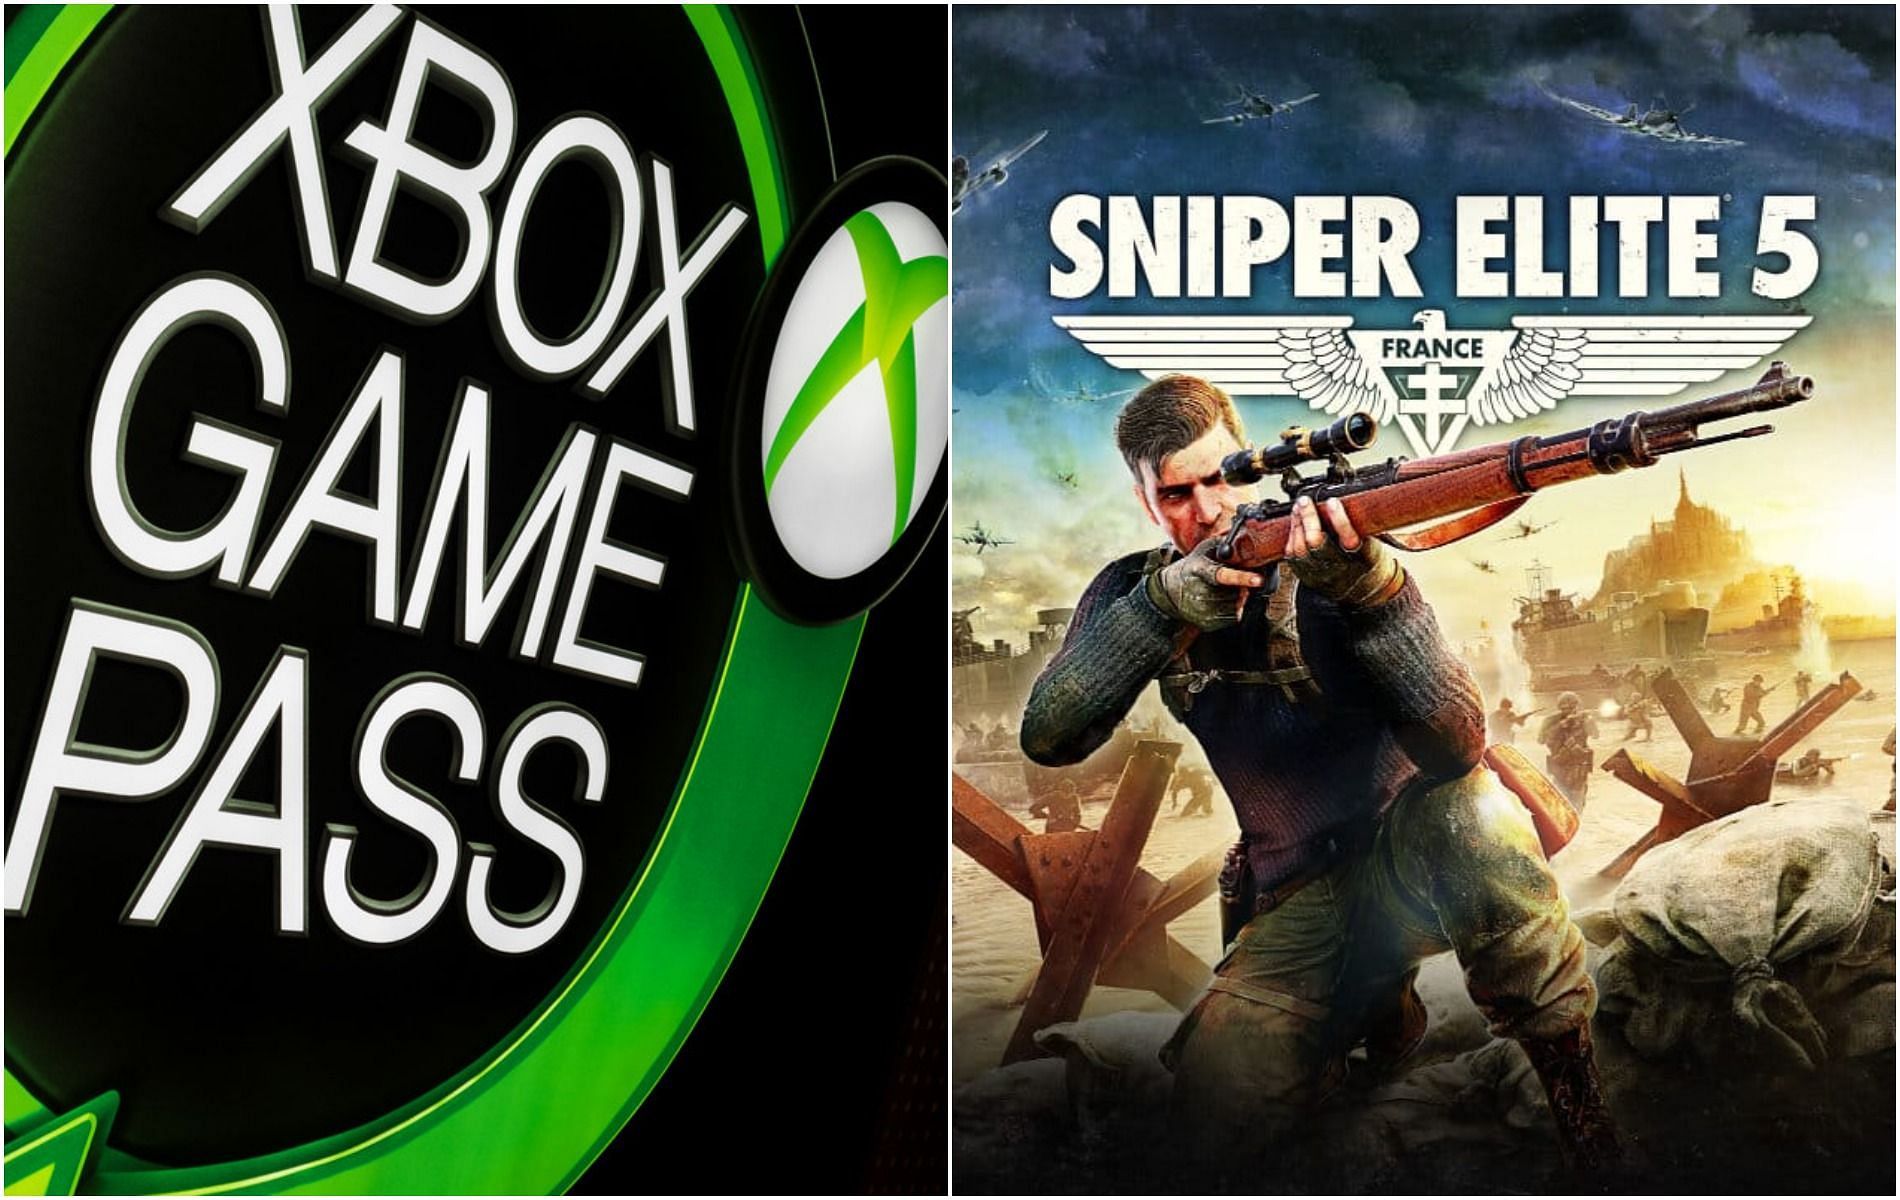 Sniper Elite 5 is coming to Game Pass in May 2022 (Image by Xbox and Rebellion)